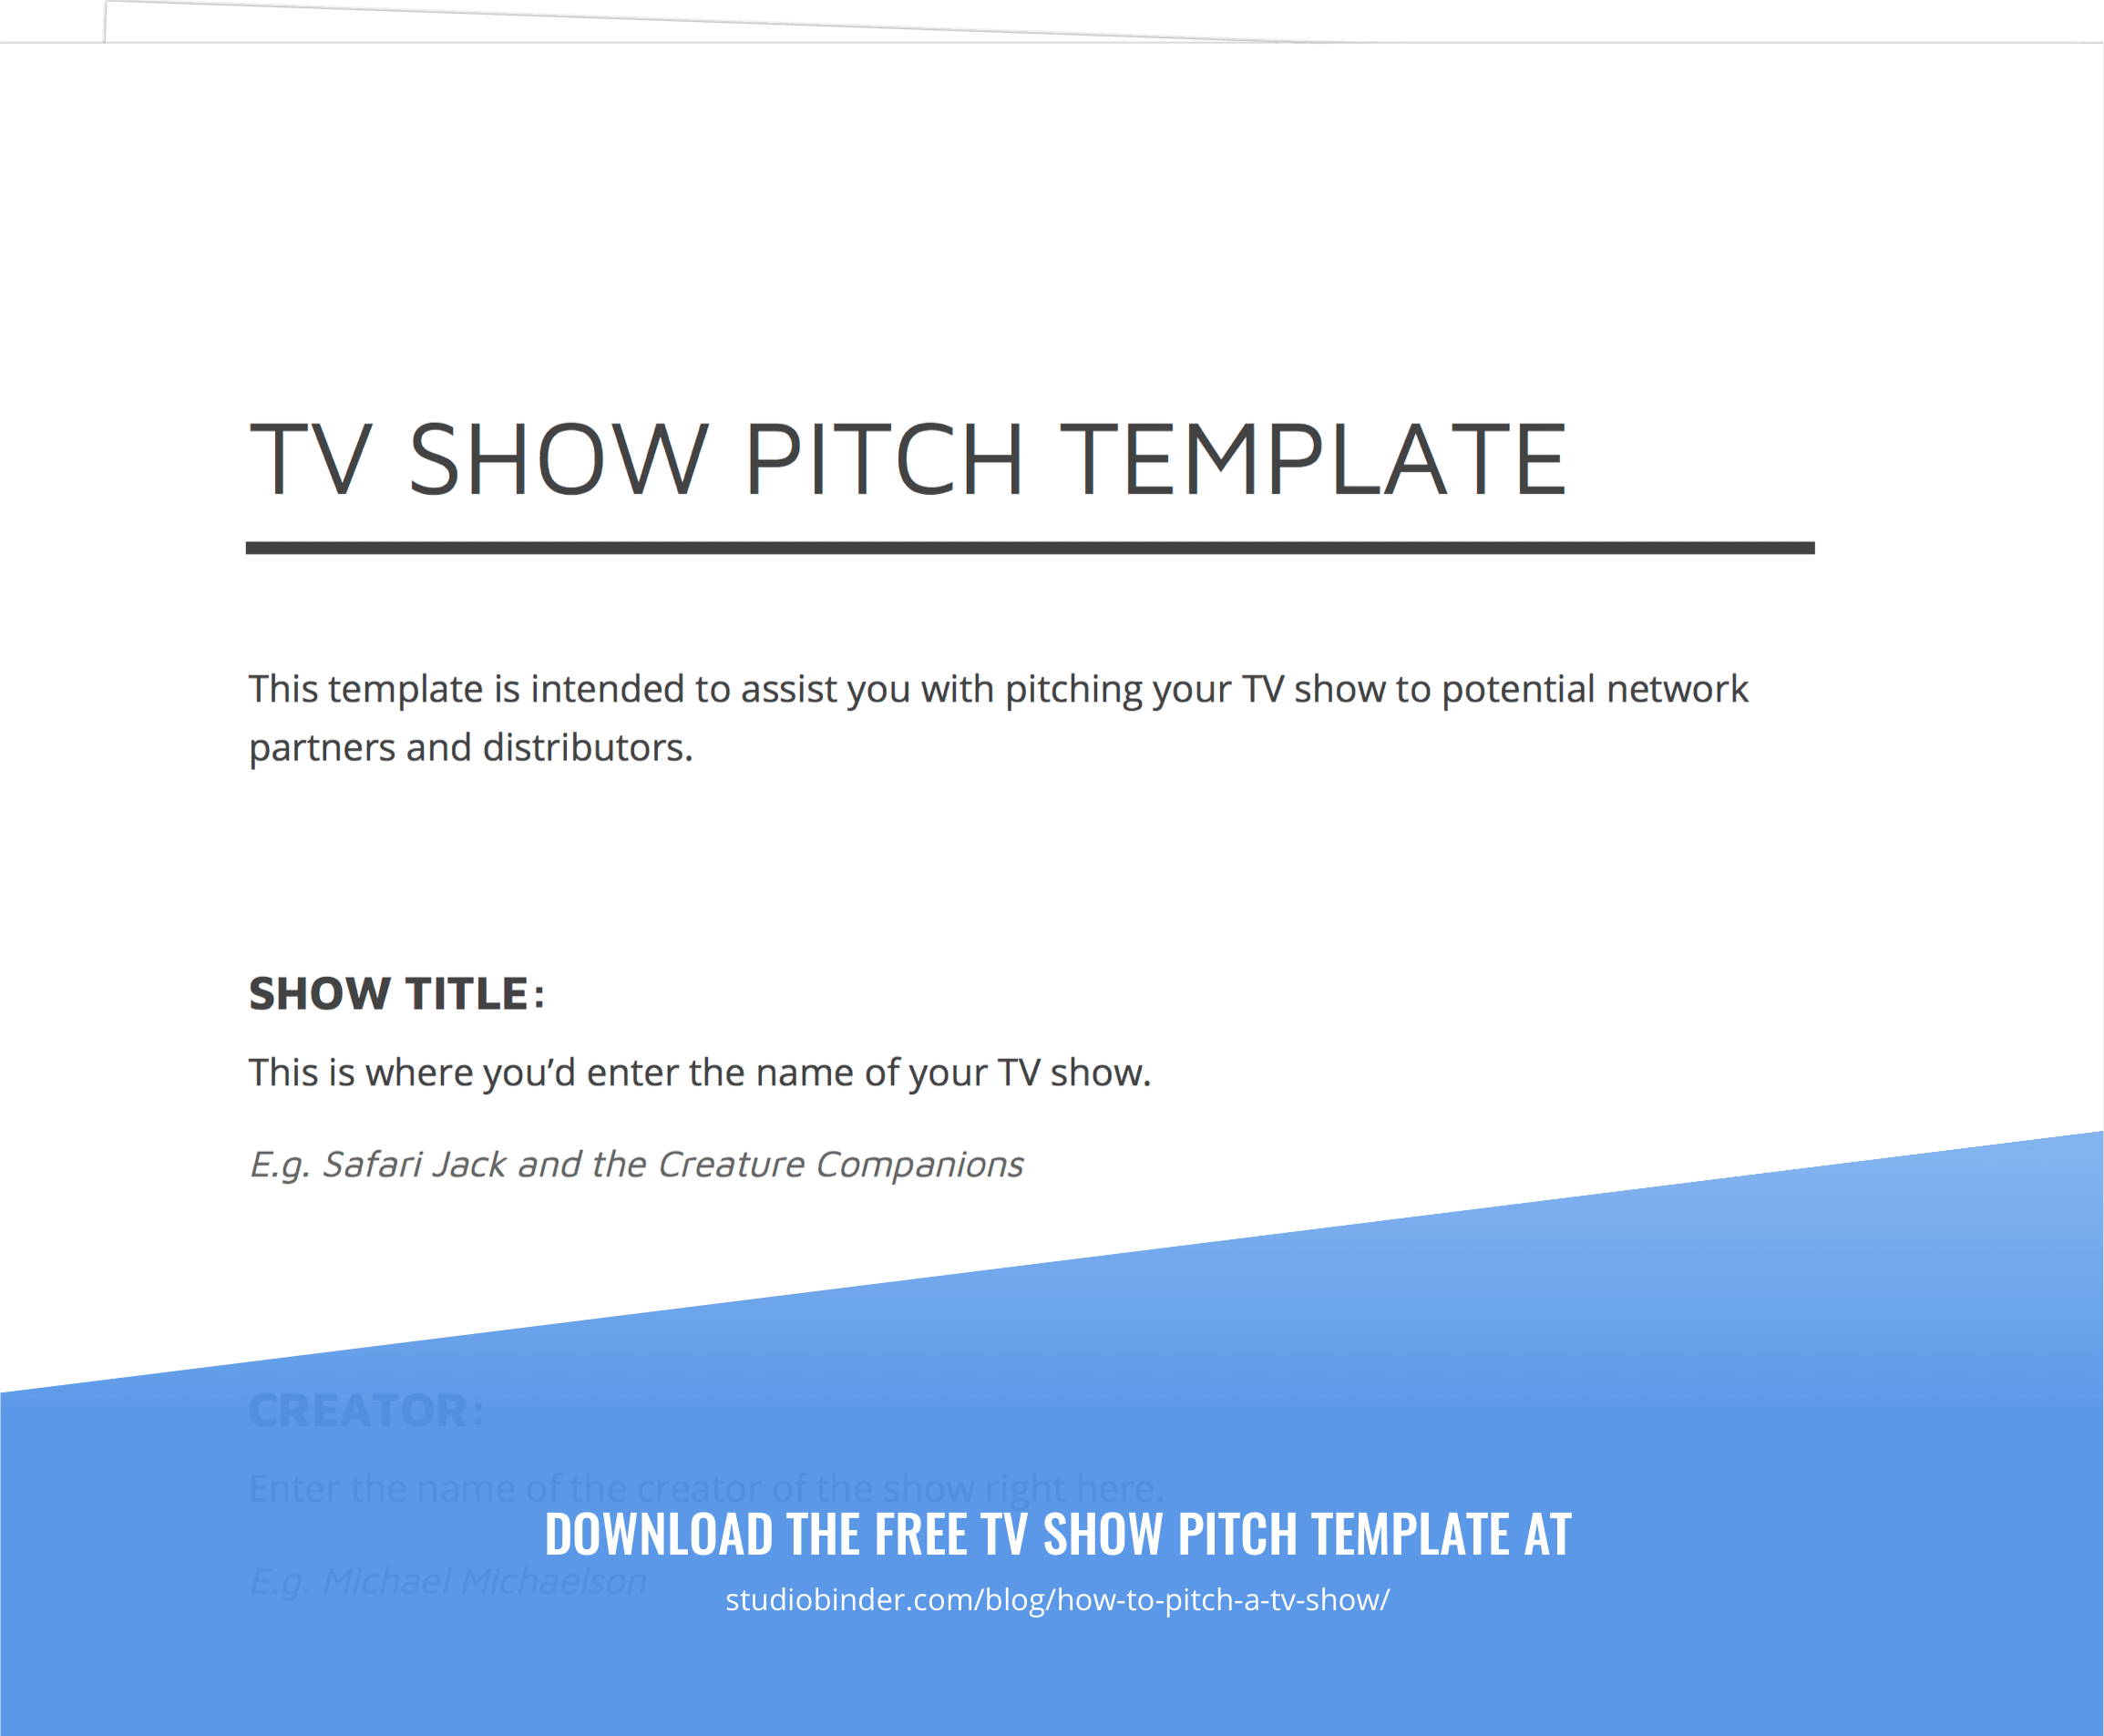 TV Show Pitch Template - Exit Intent - StudioBinder